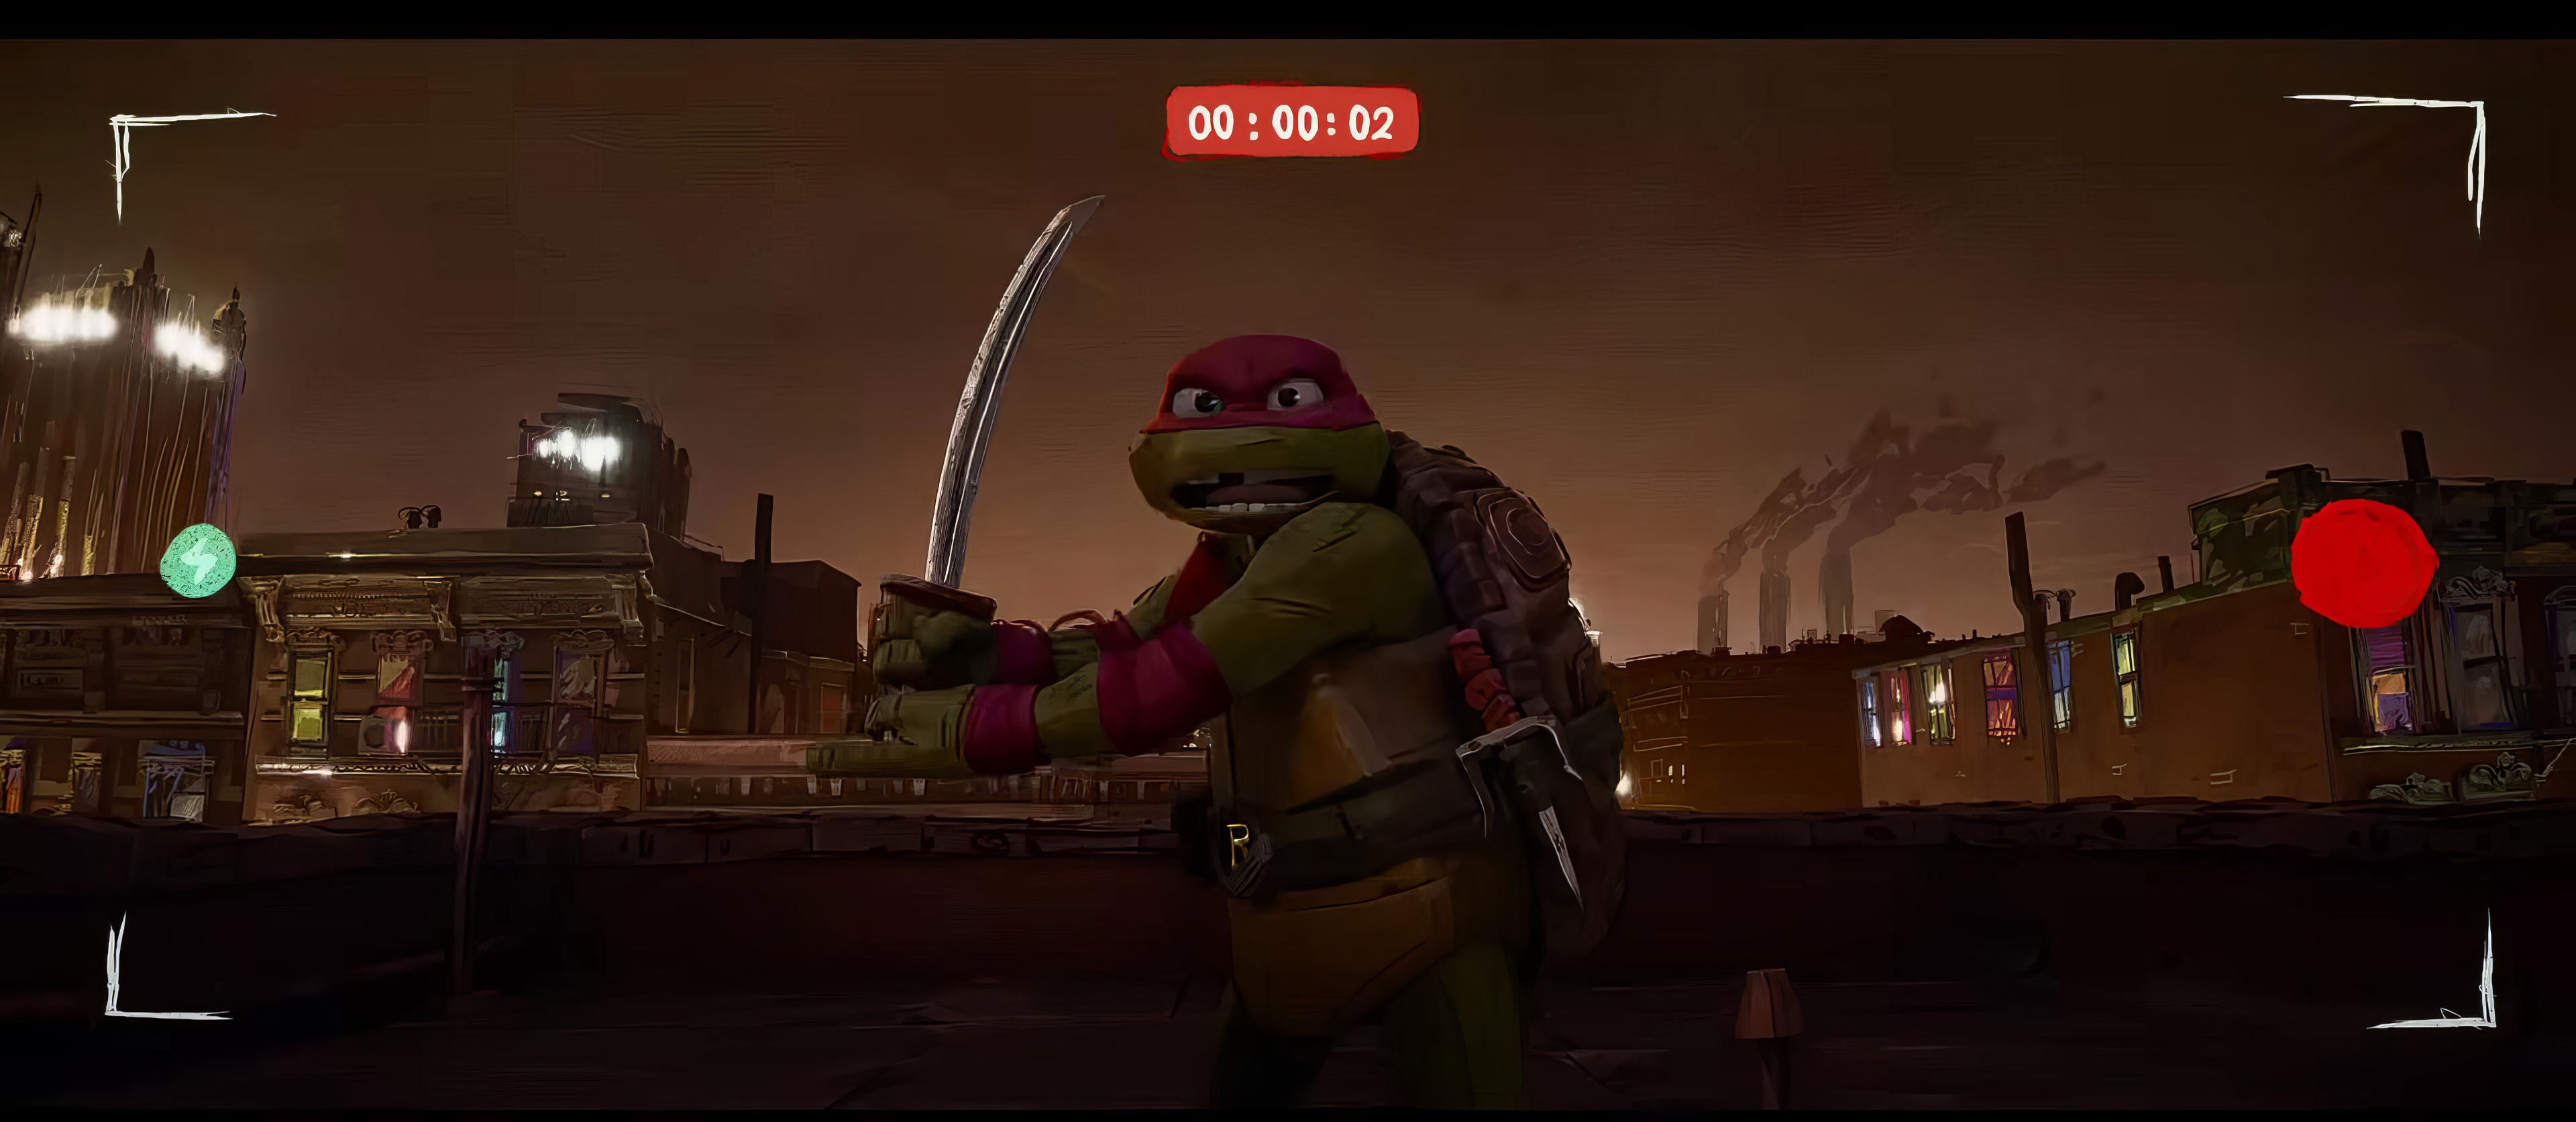 HD wallpaper of a Teenage Mutant Ninja Turtle from Mutant Mayhem, striking a dynamic pose with his sword on a city rooftop at dusk.